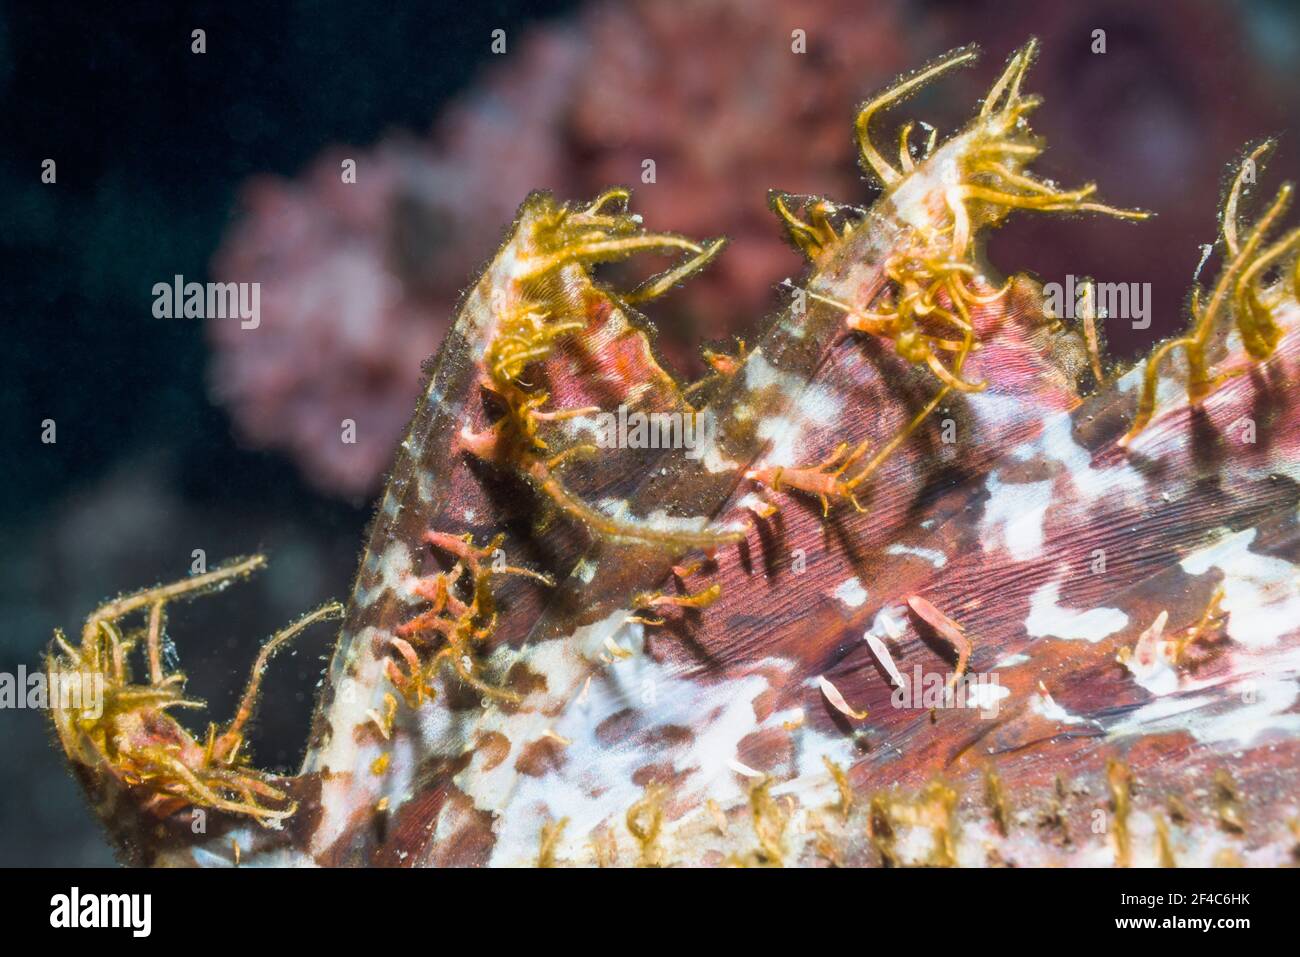 Tips of the venomous spines in the dorsal fin of a scorpionfish.  Tulamben, Bali, Indonesia. Stock Photo